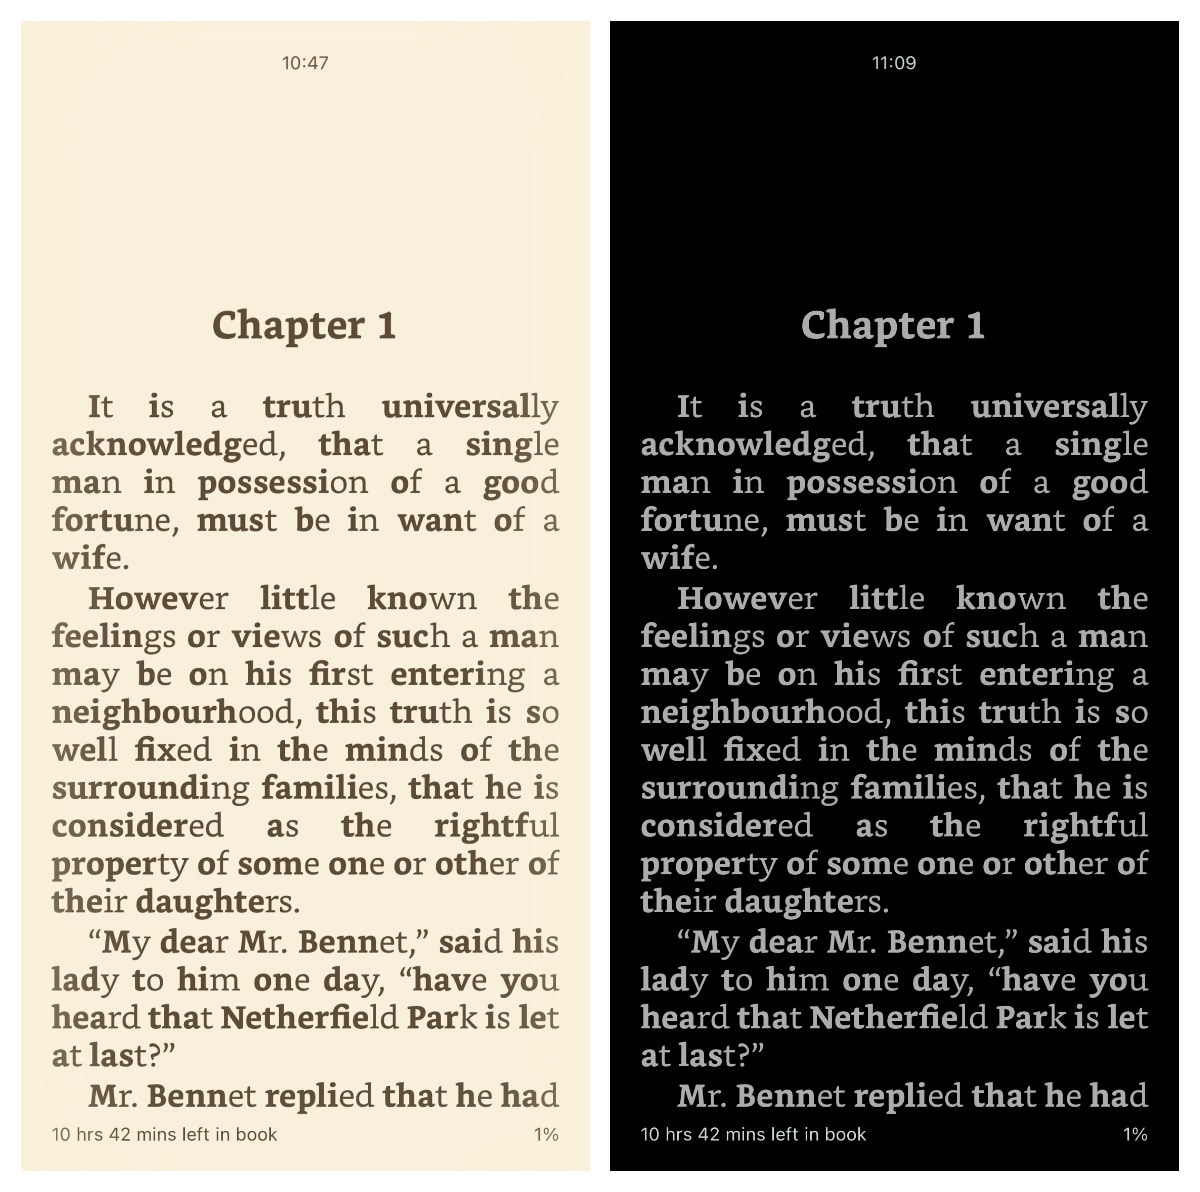 Bionic book imported to Kindle iOS app